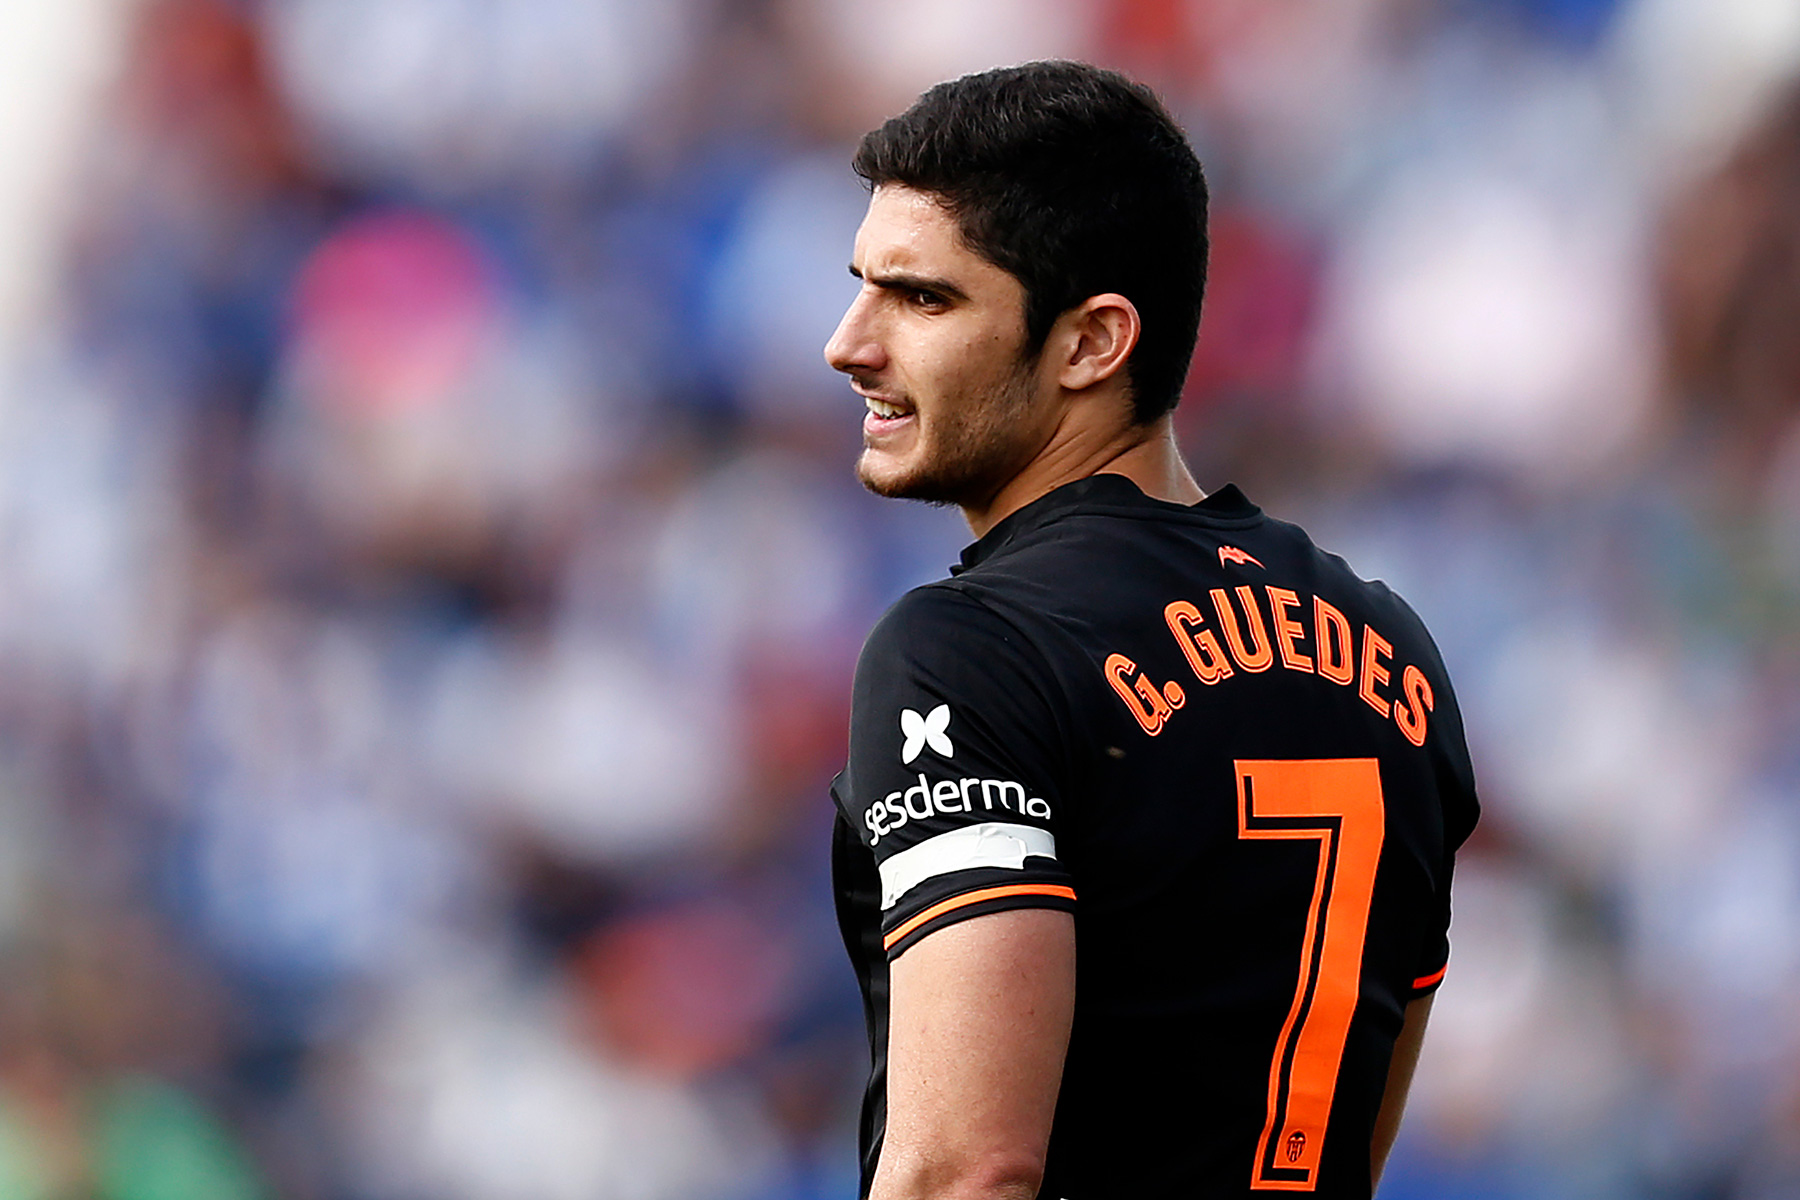 goncalo guedes - photo #1